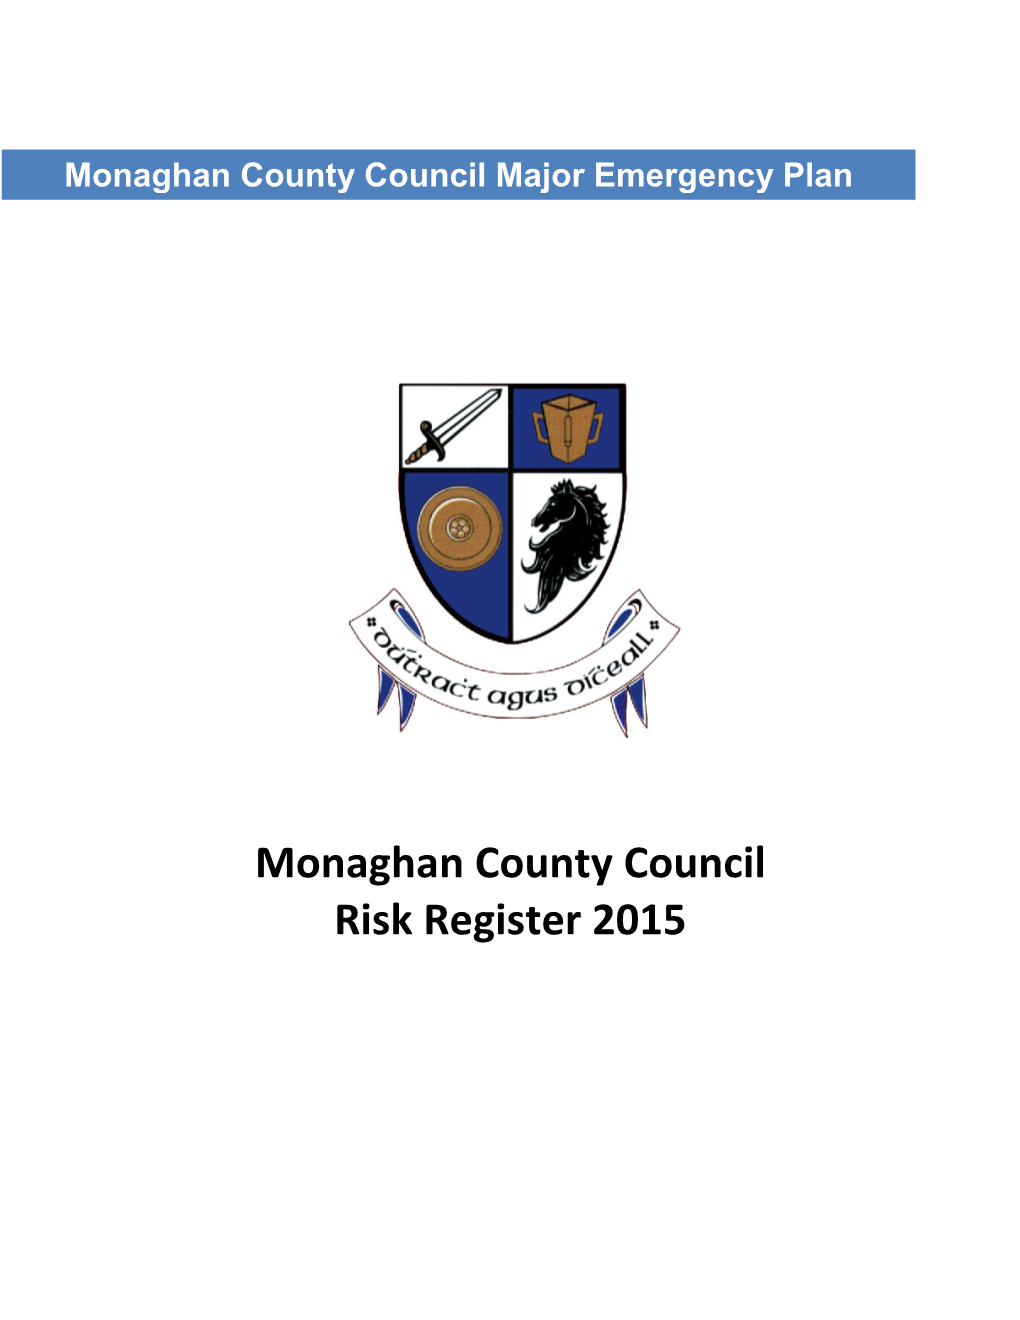 Monaghan County Council Risk Register 2015